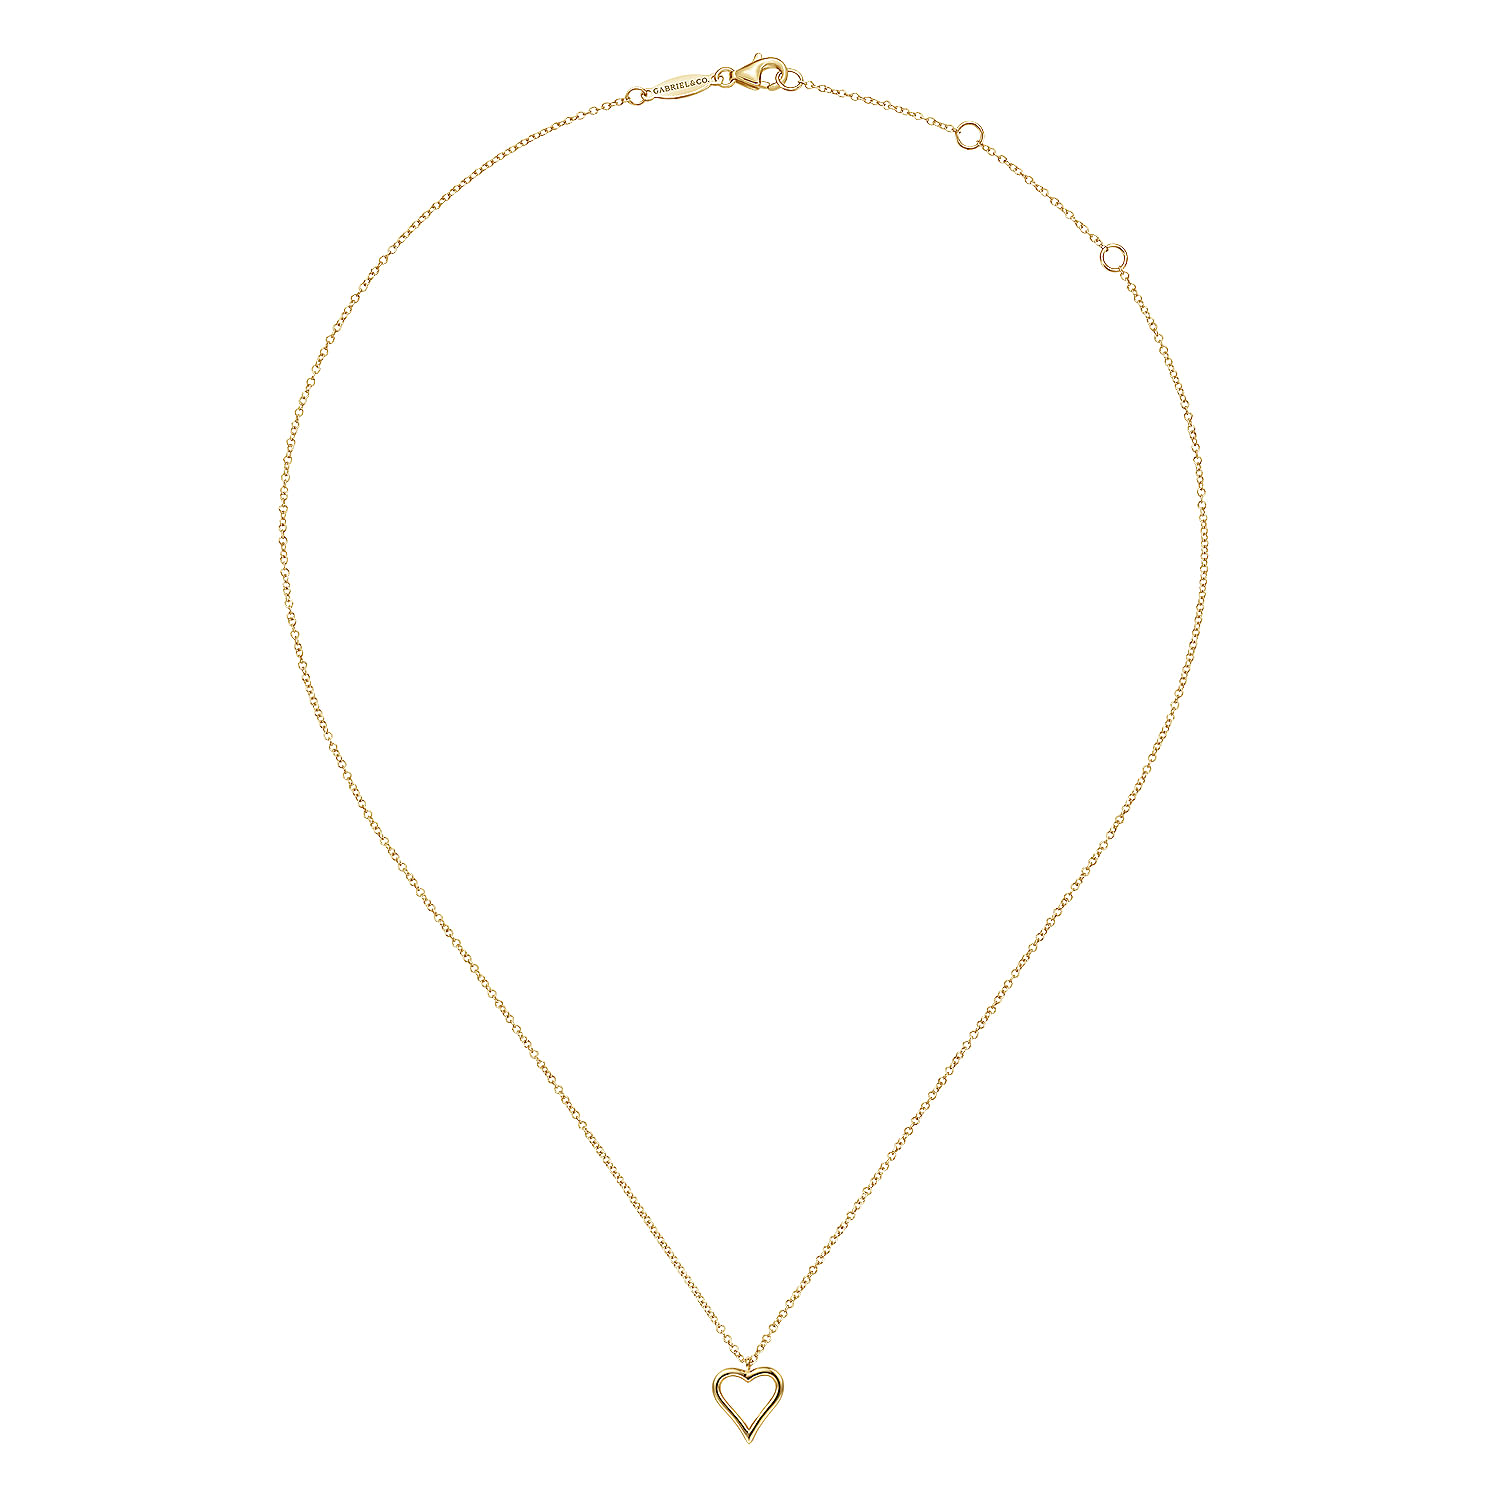 14K Yellow Gold Open Heart Pendant Necklace